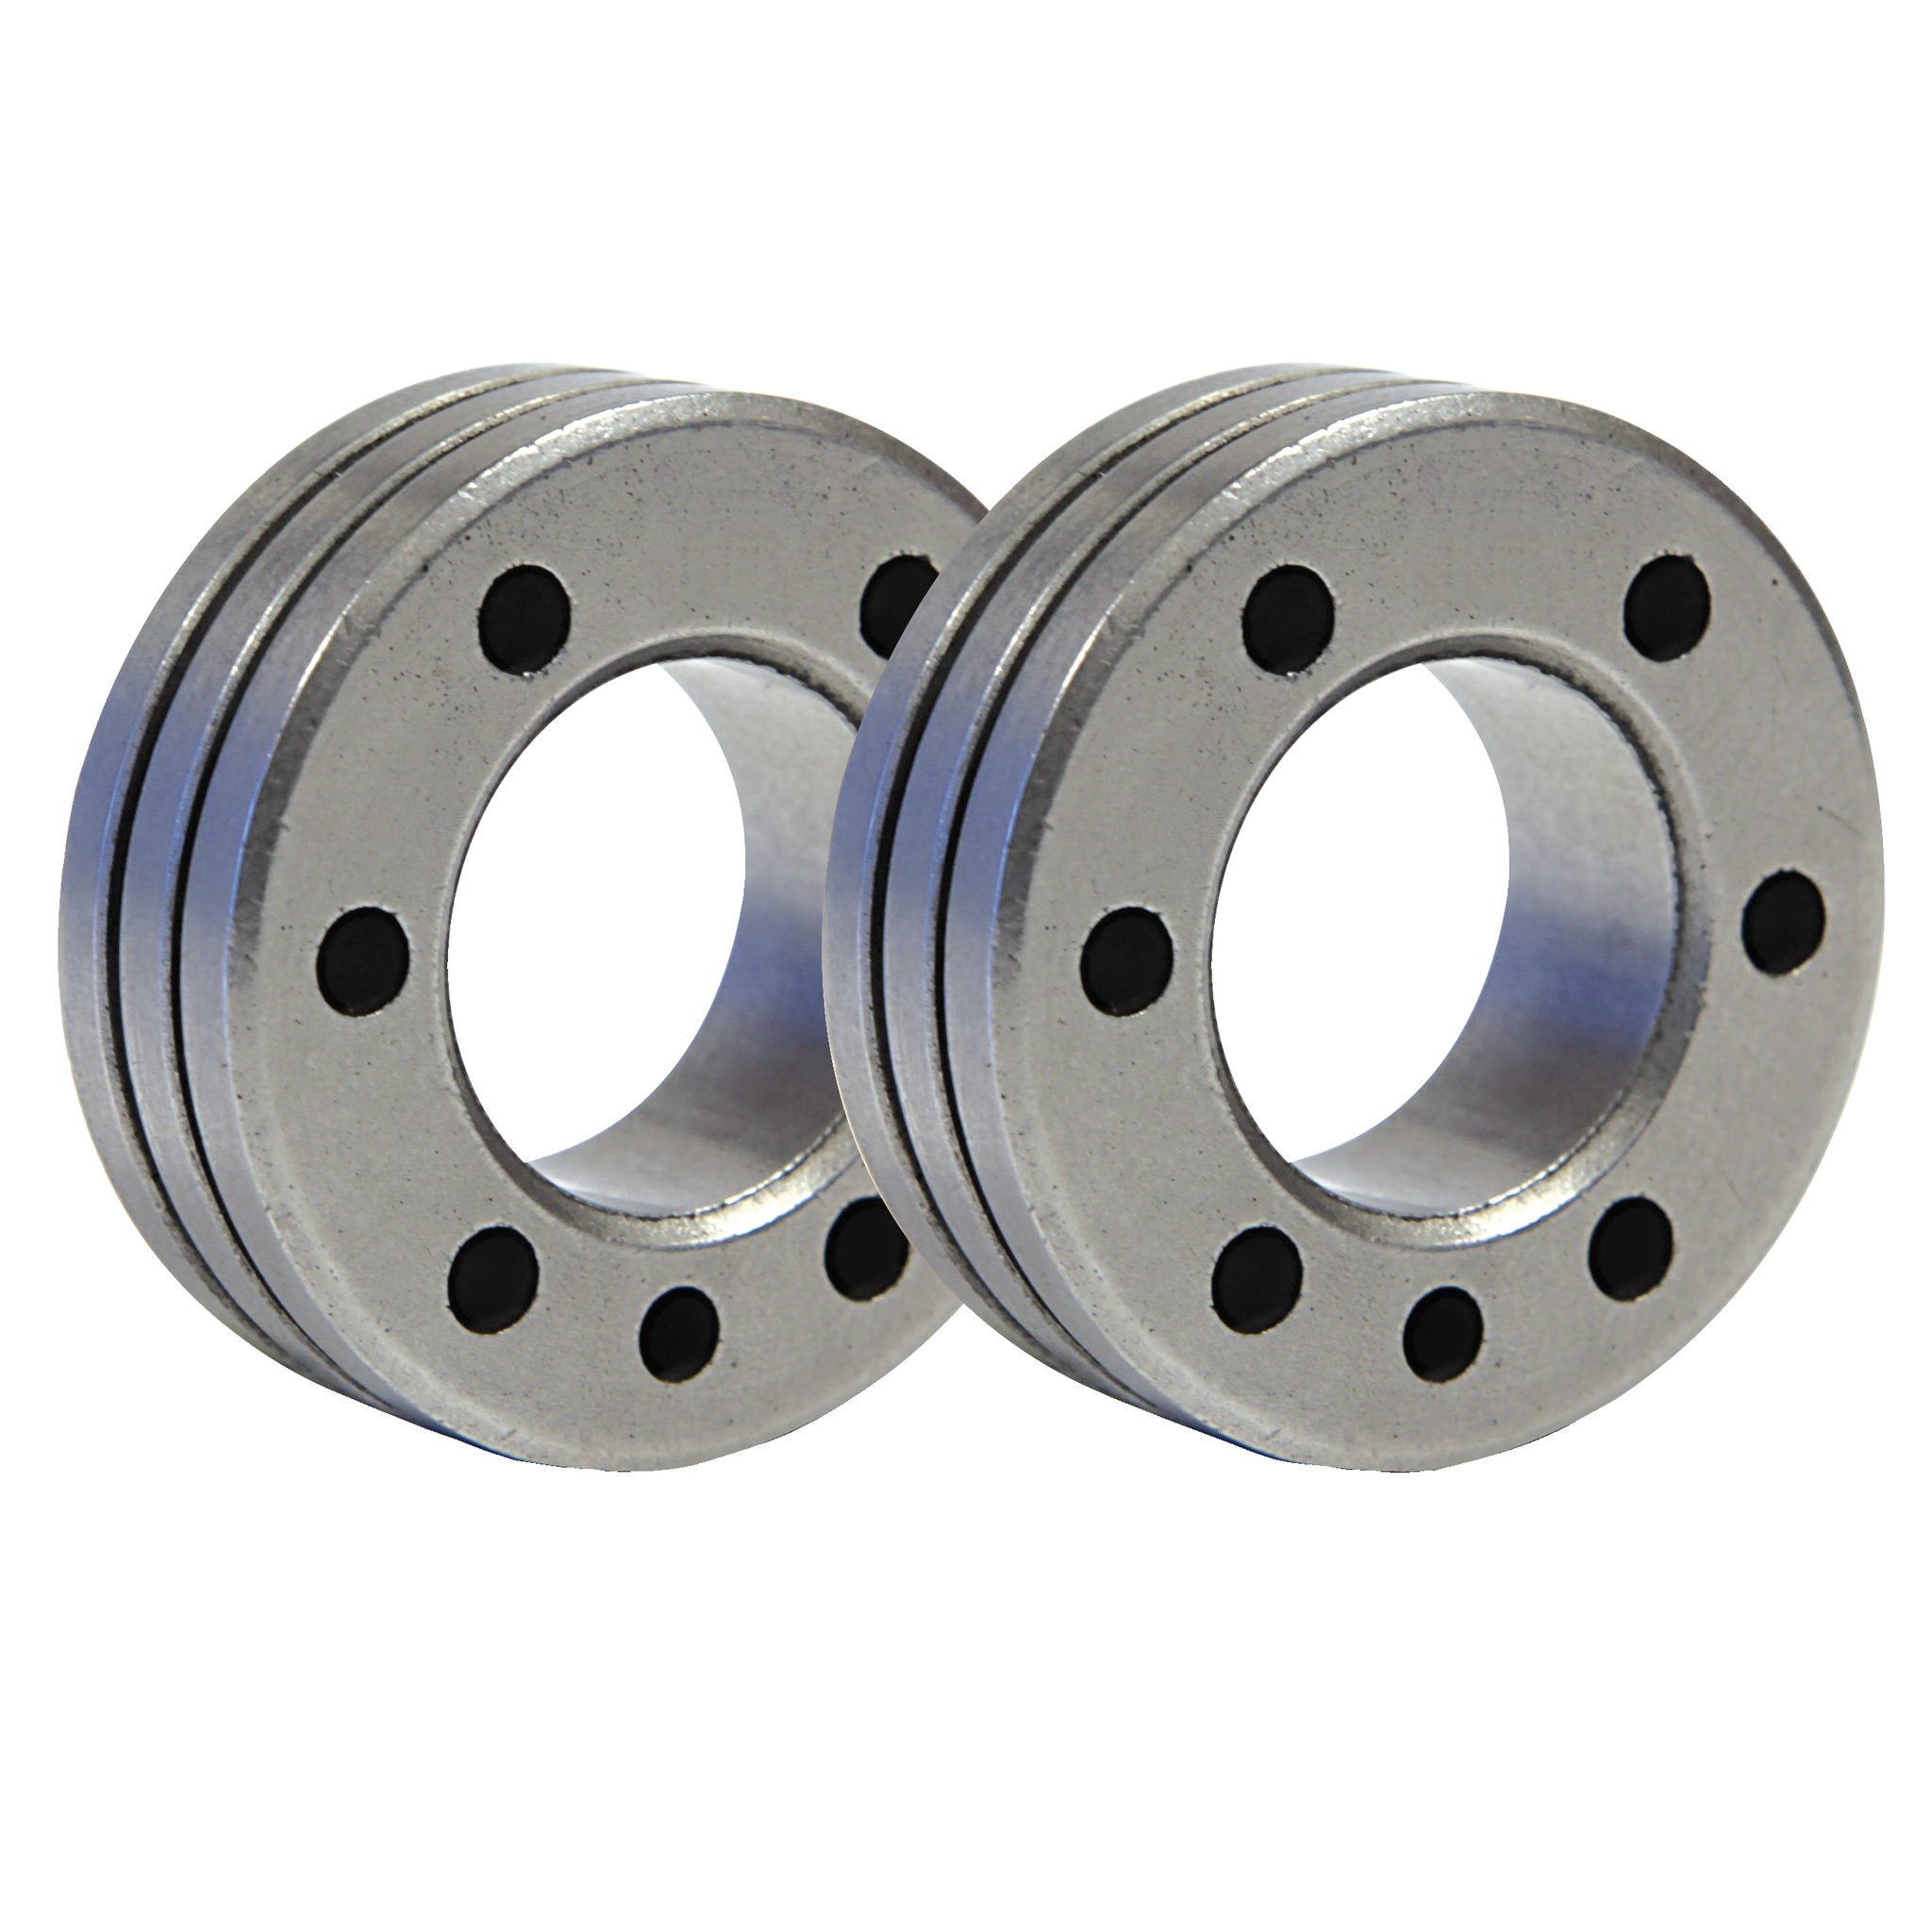 Drive Rollers Type C  0.8/1.0mm - Ali. Set of 2